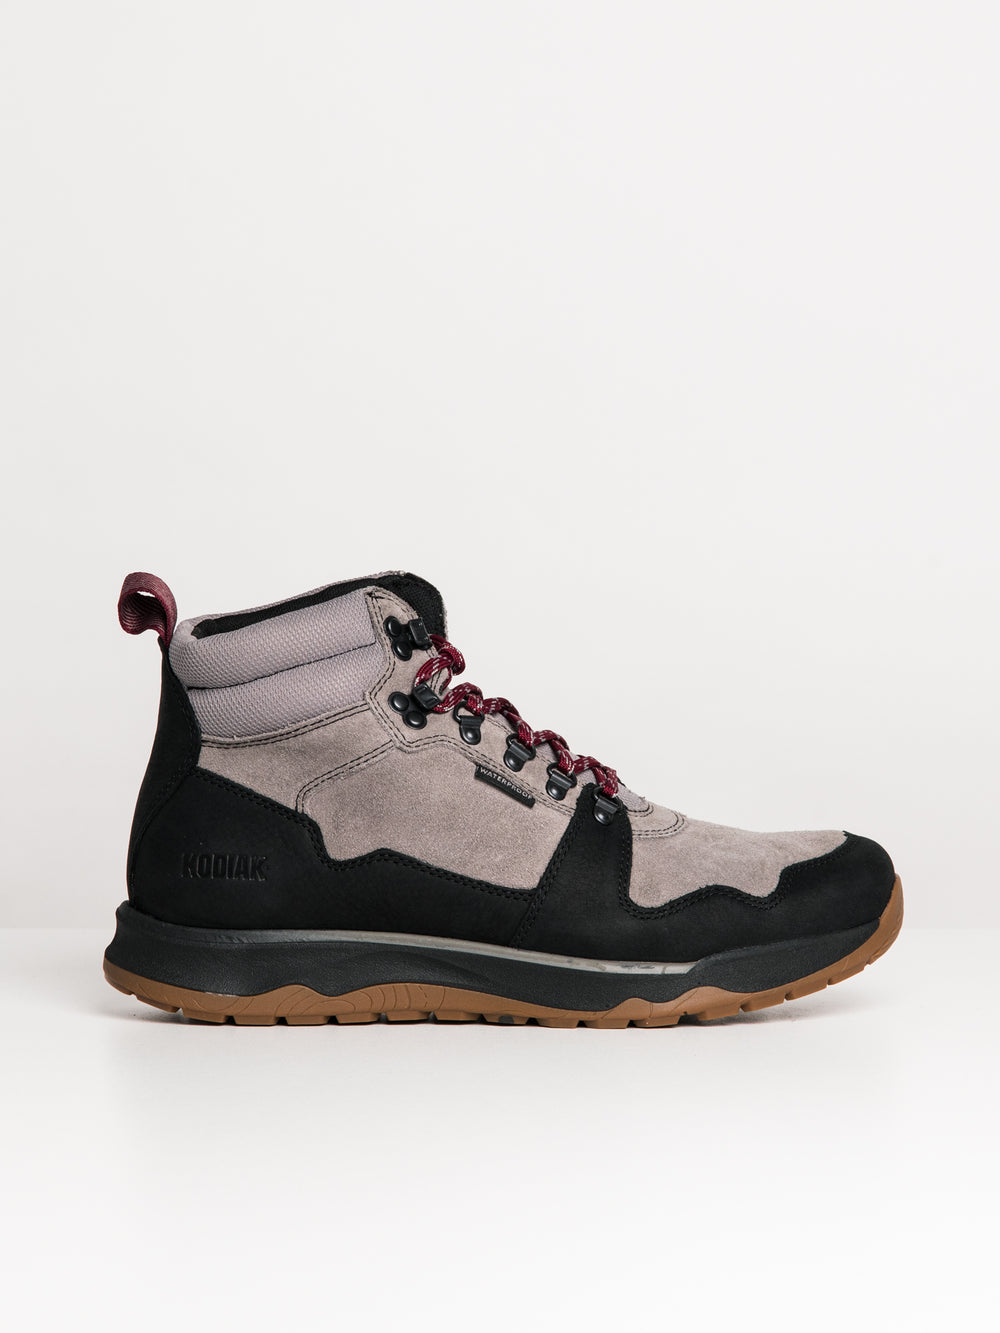 MENS KODIAK STAVE MUDDY RIVER BOOT - CLEARANCE | Boathouse Footwear ...